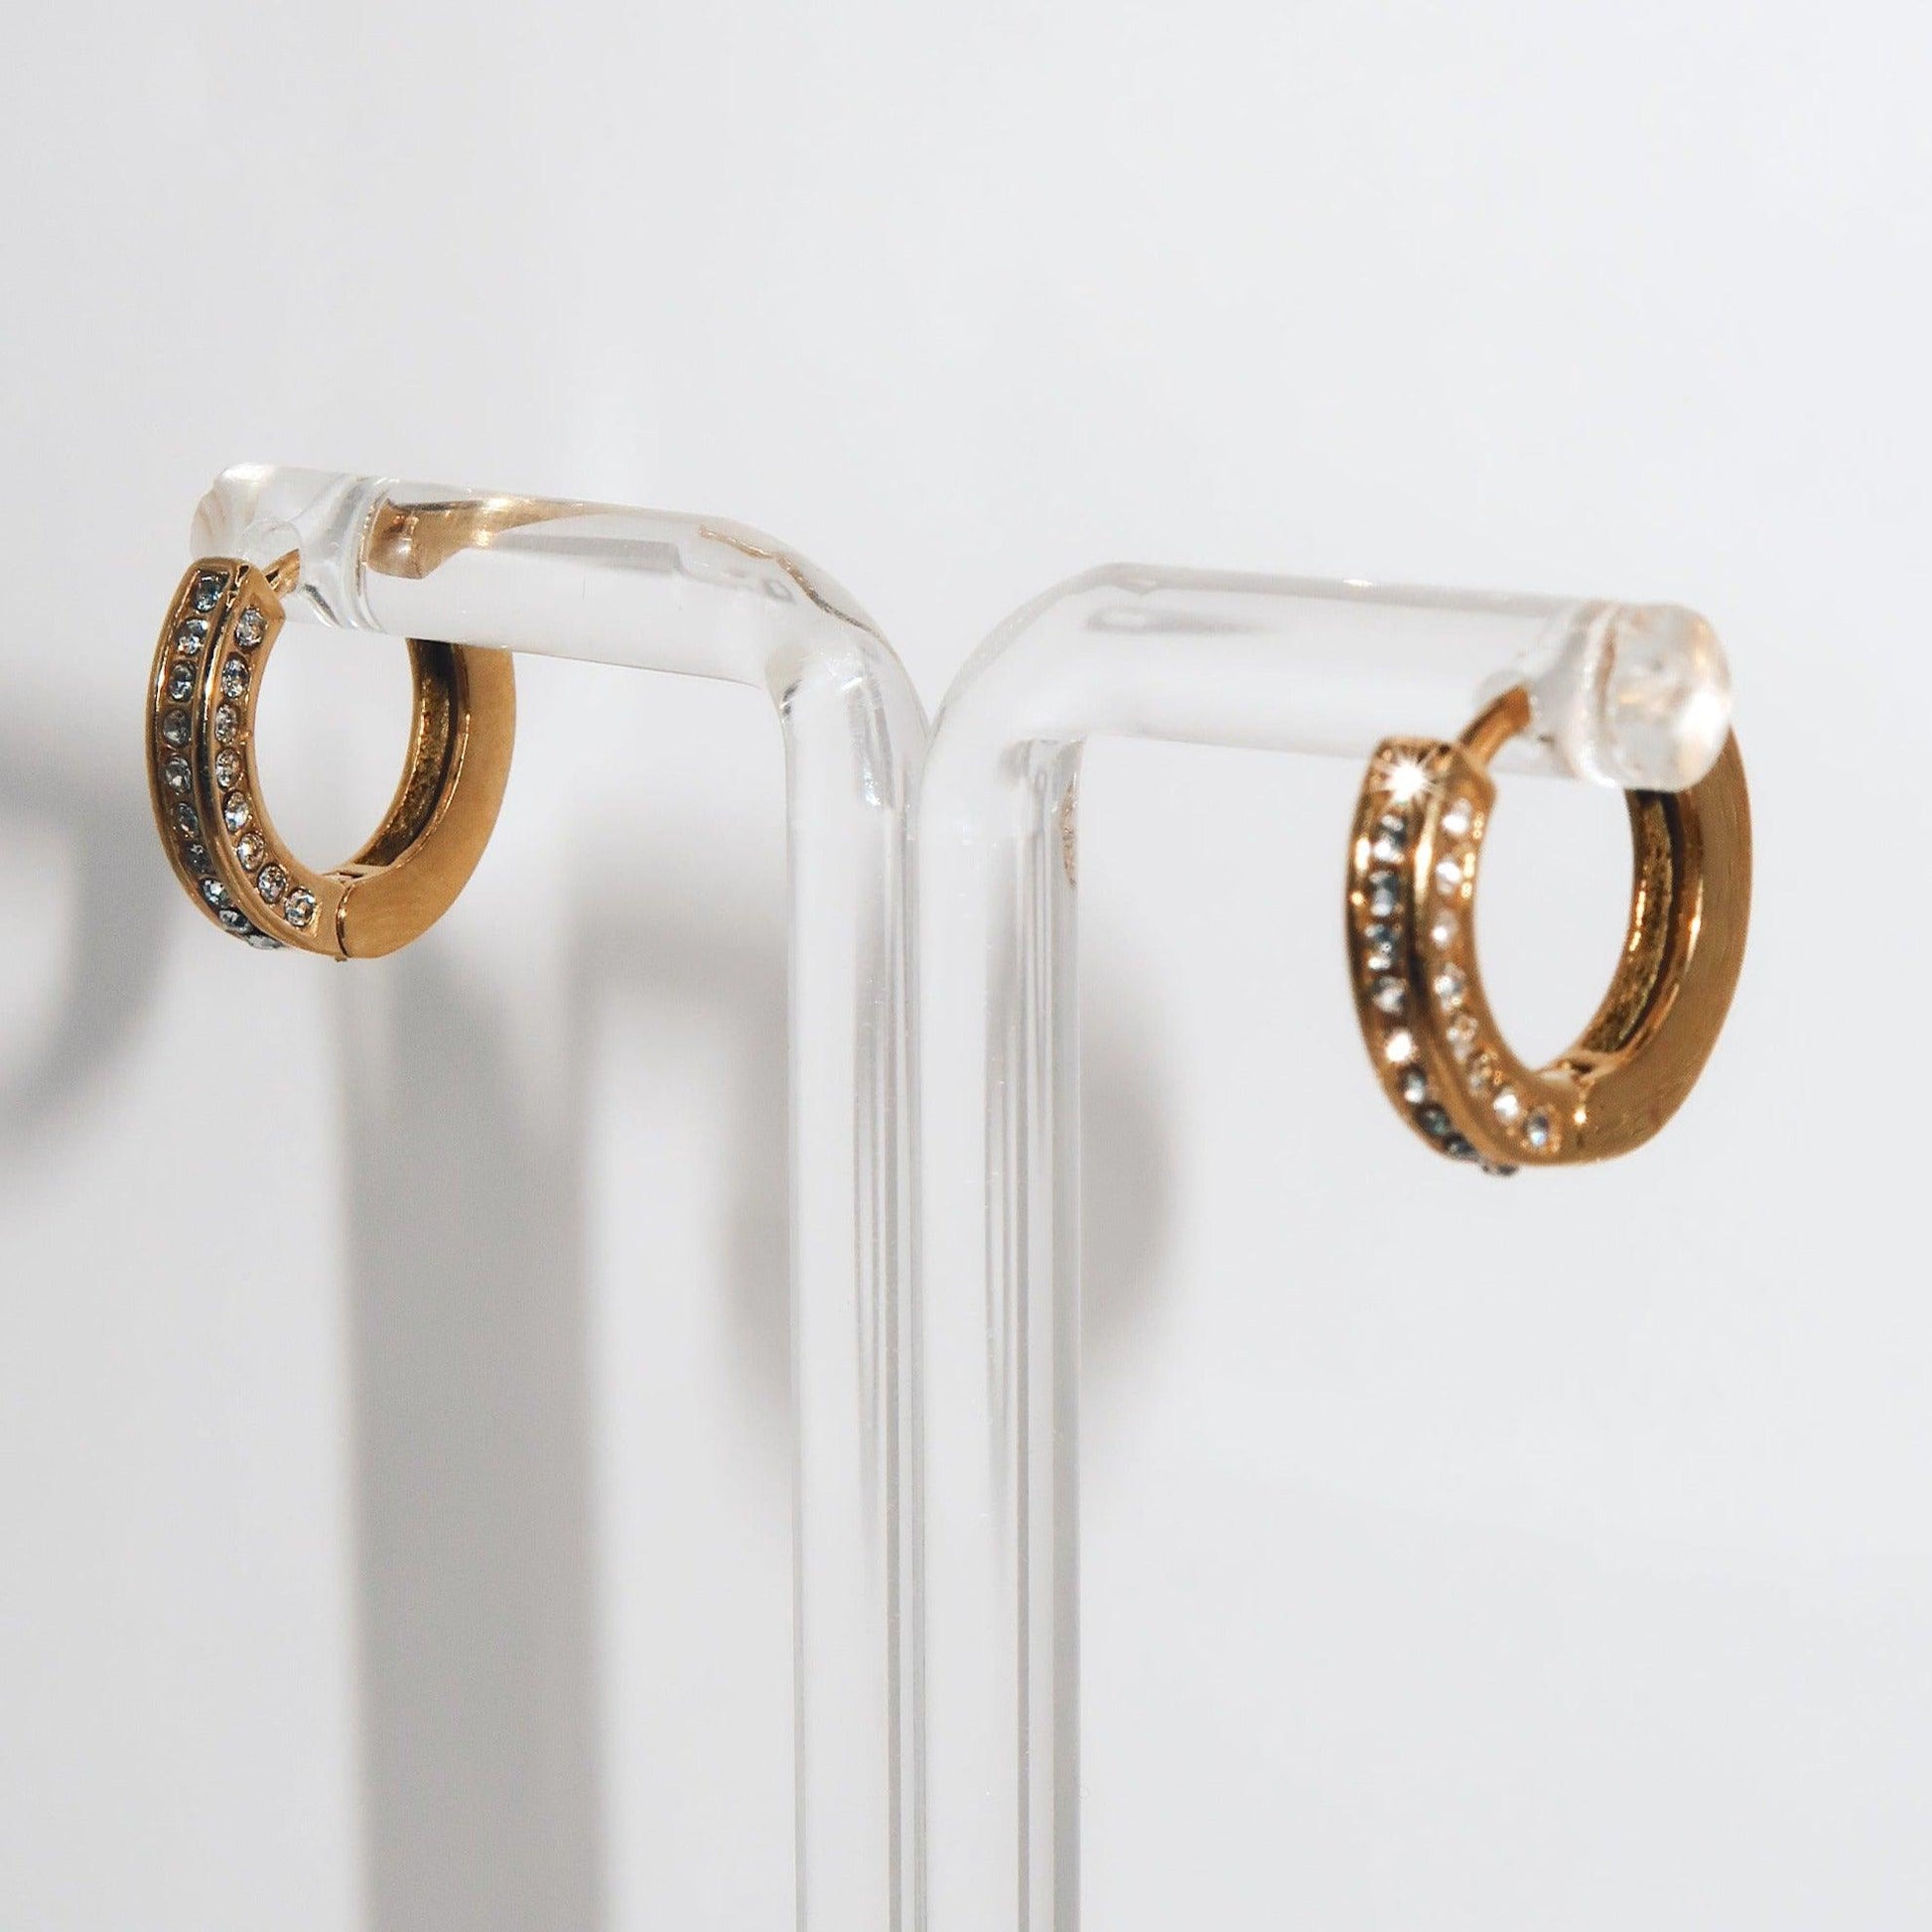 KIMBERLY - 18K PVD Gold Plated Small Hoop Earrings with CZ Stones - Mixed Metals